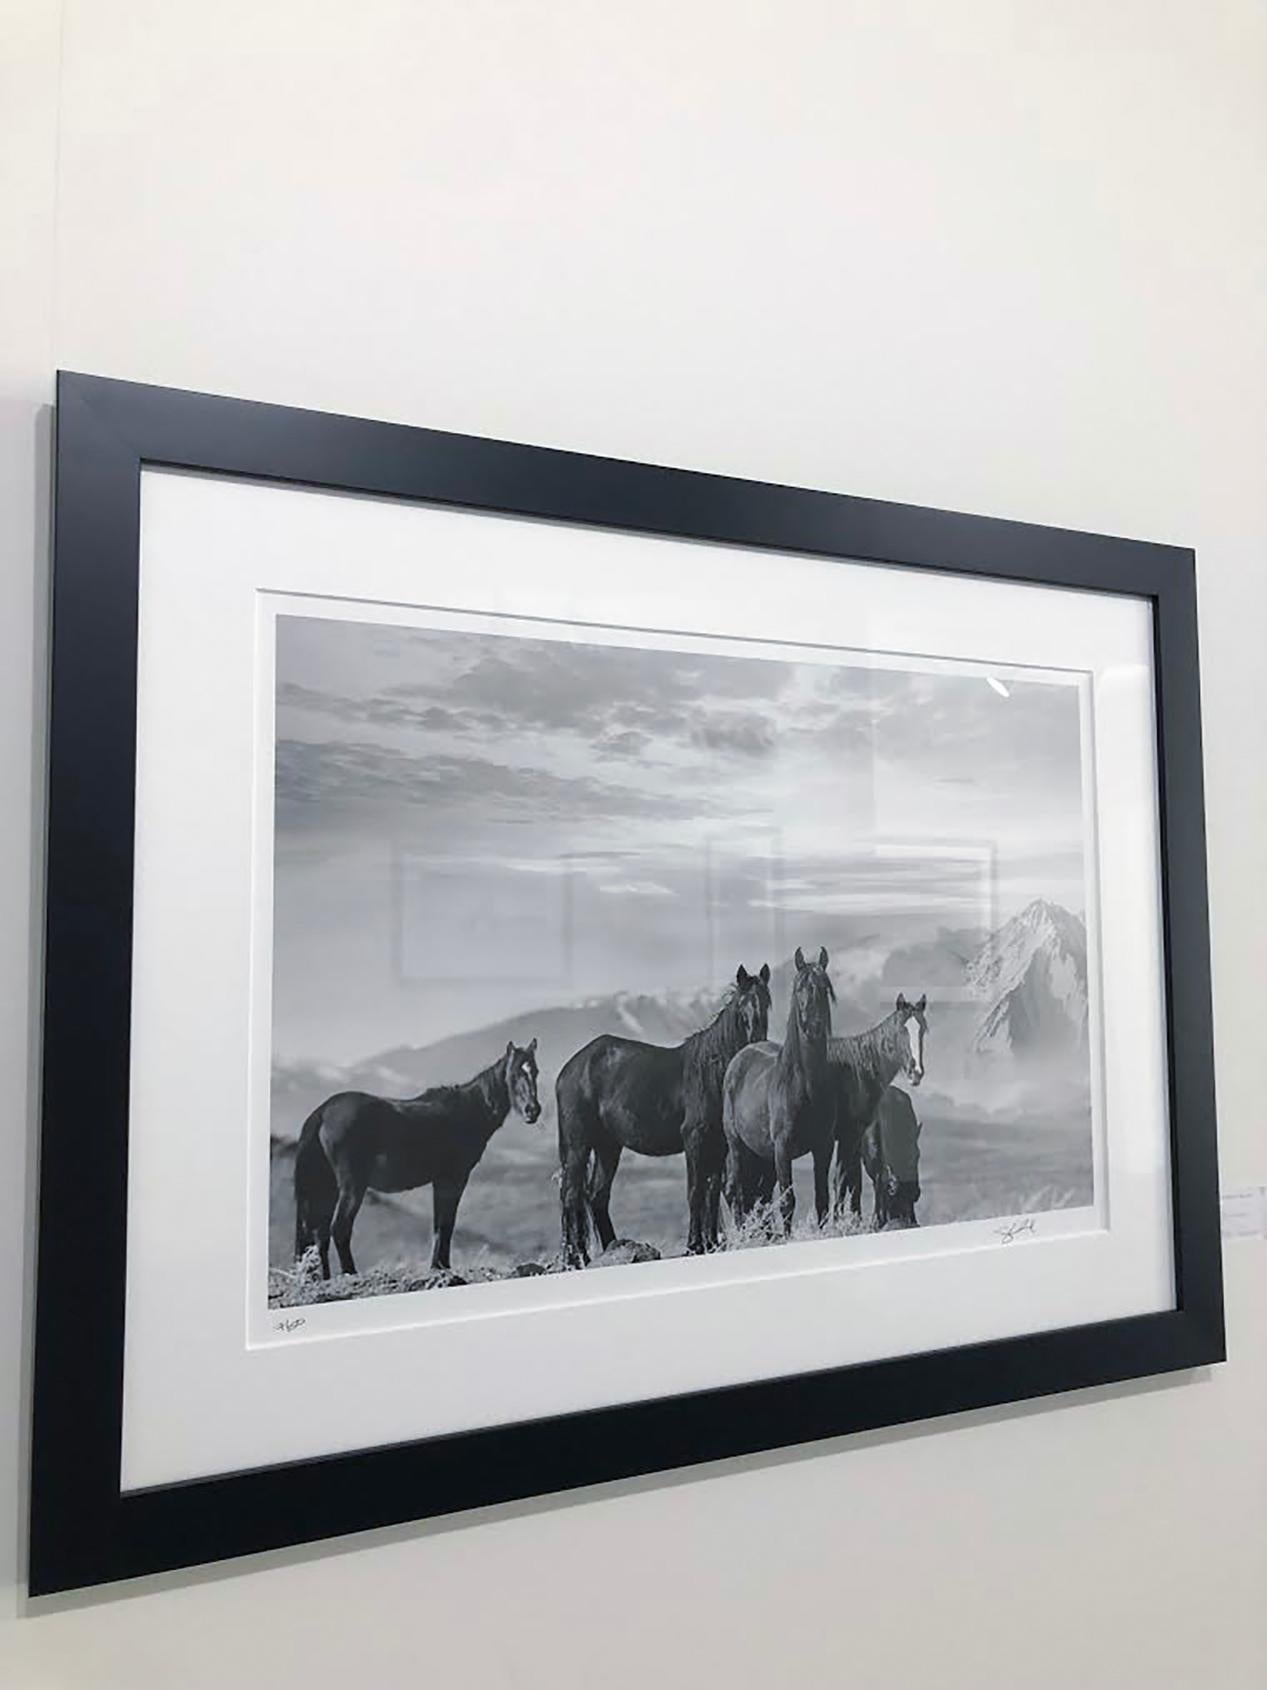 High Sierra Mustangs - 40x60 Black and White Photography of Wild Horses - Print by Shane Russeck